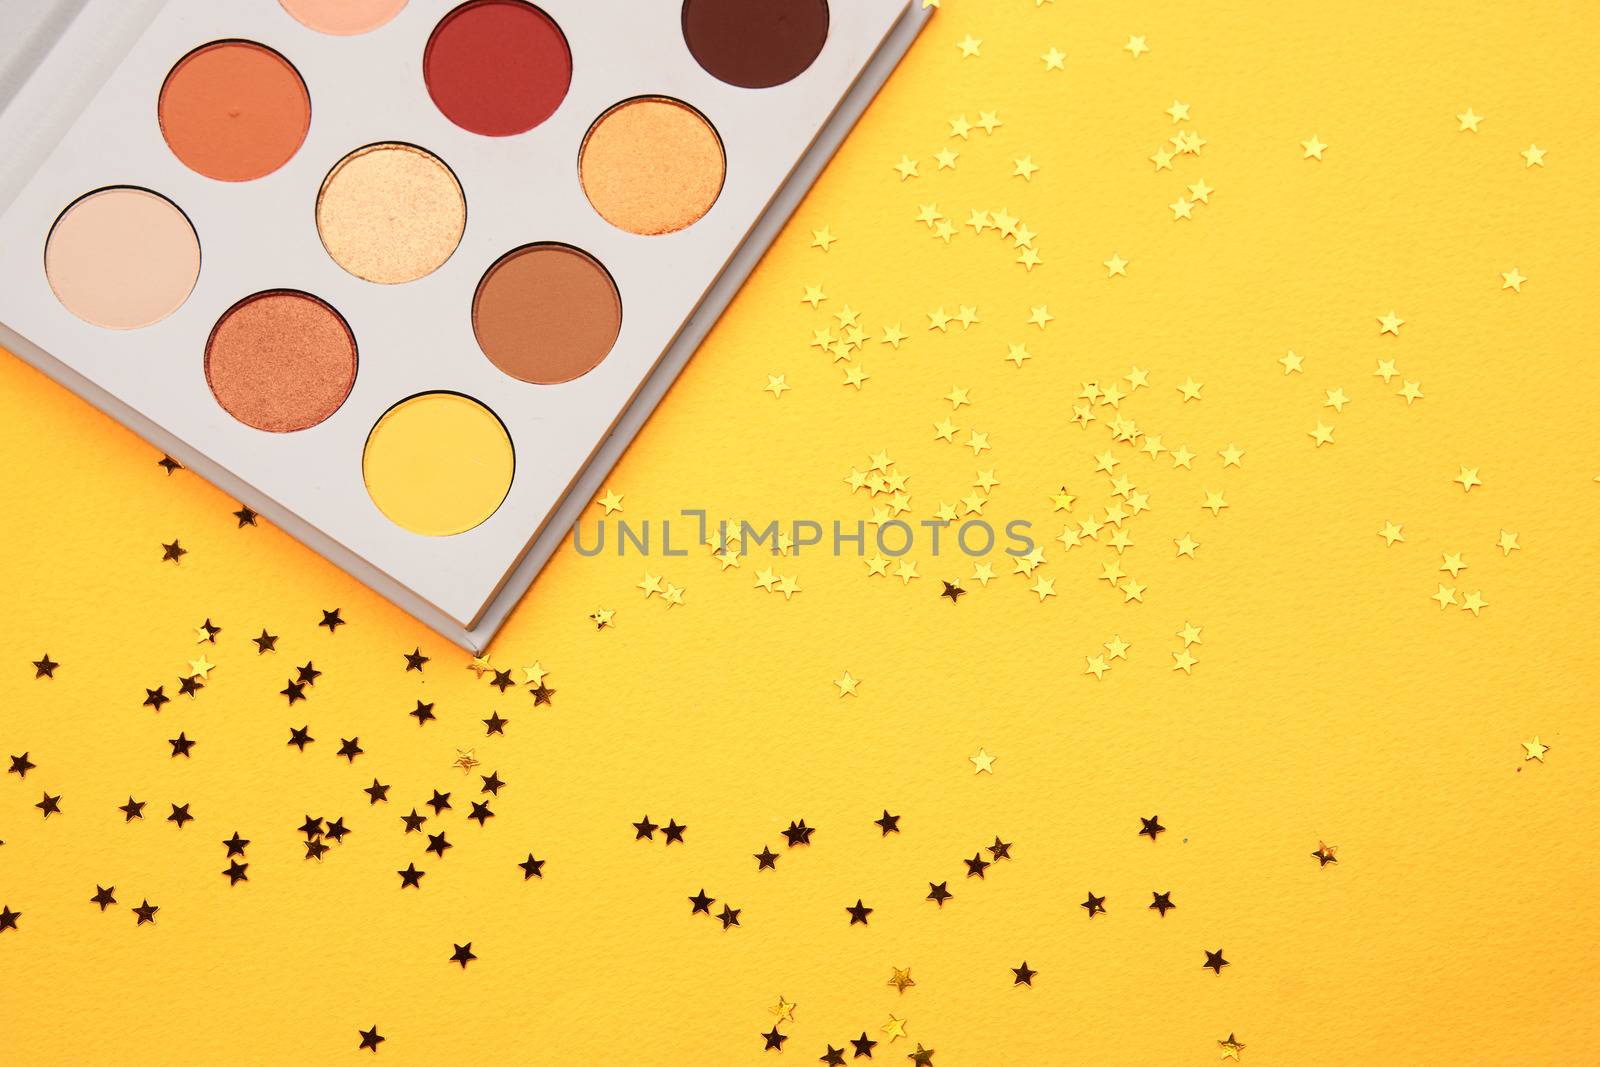 eyeshadow on a yellow background and glitter decorations by SHOTPRIME